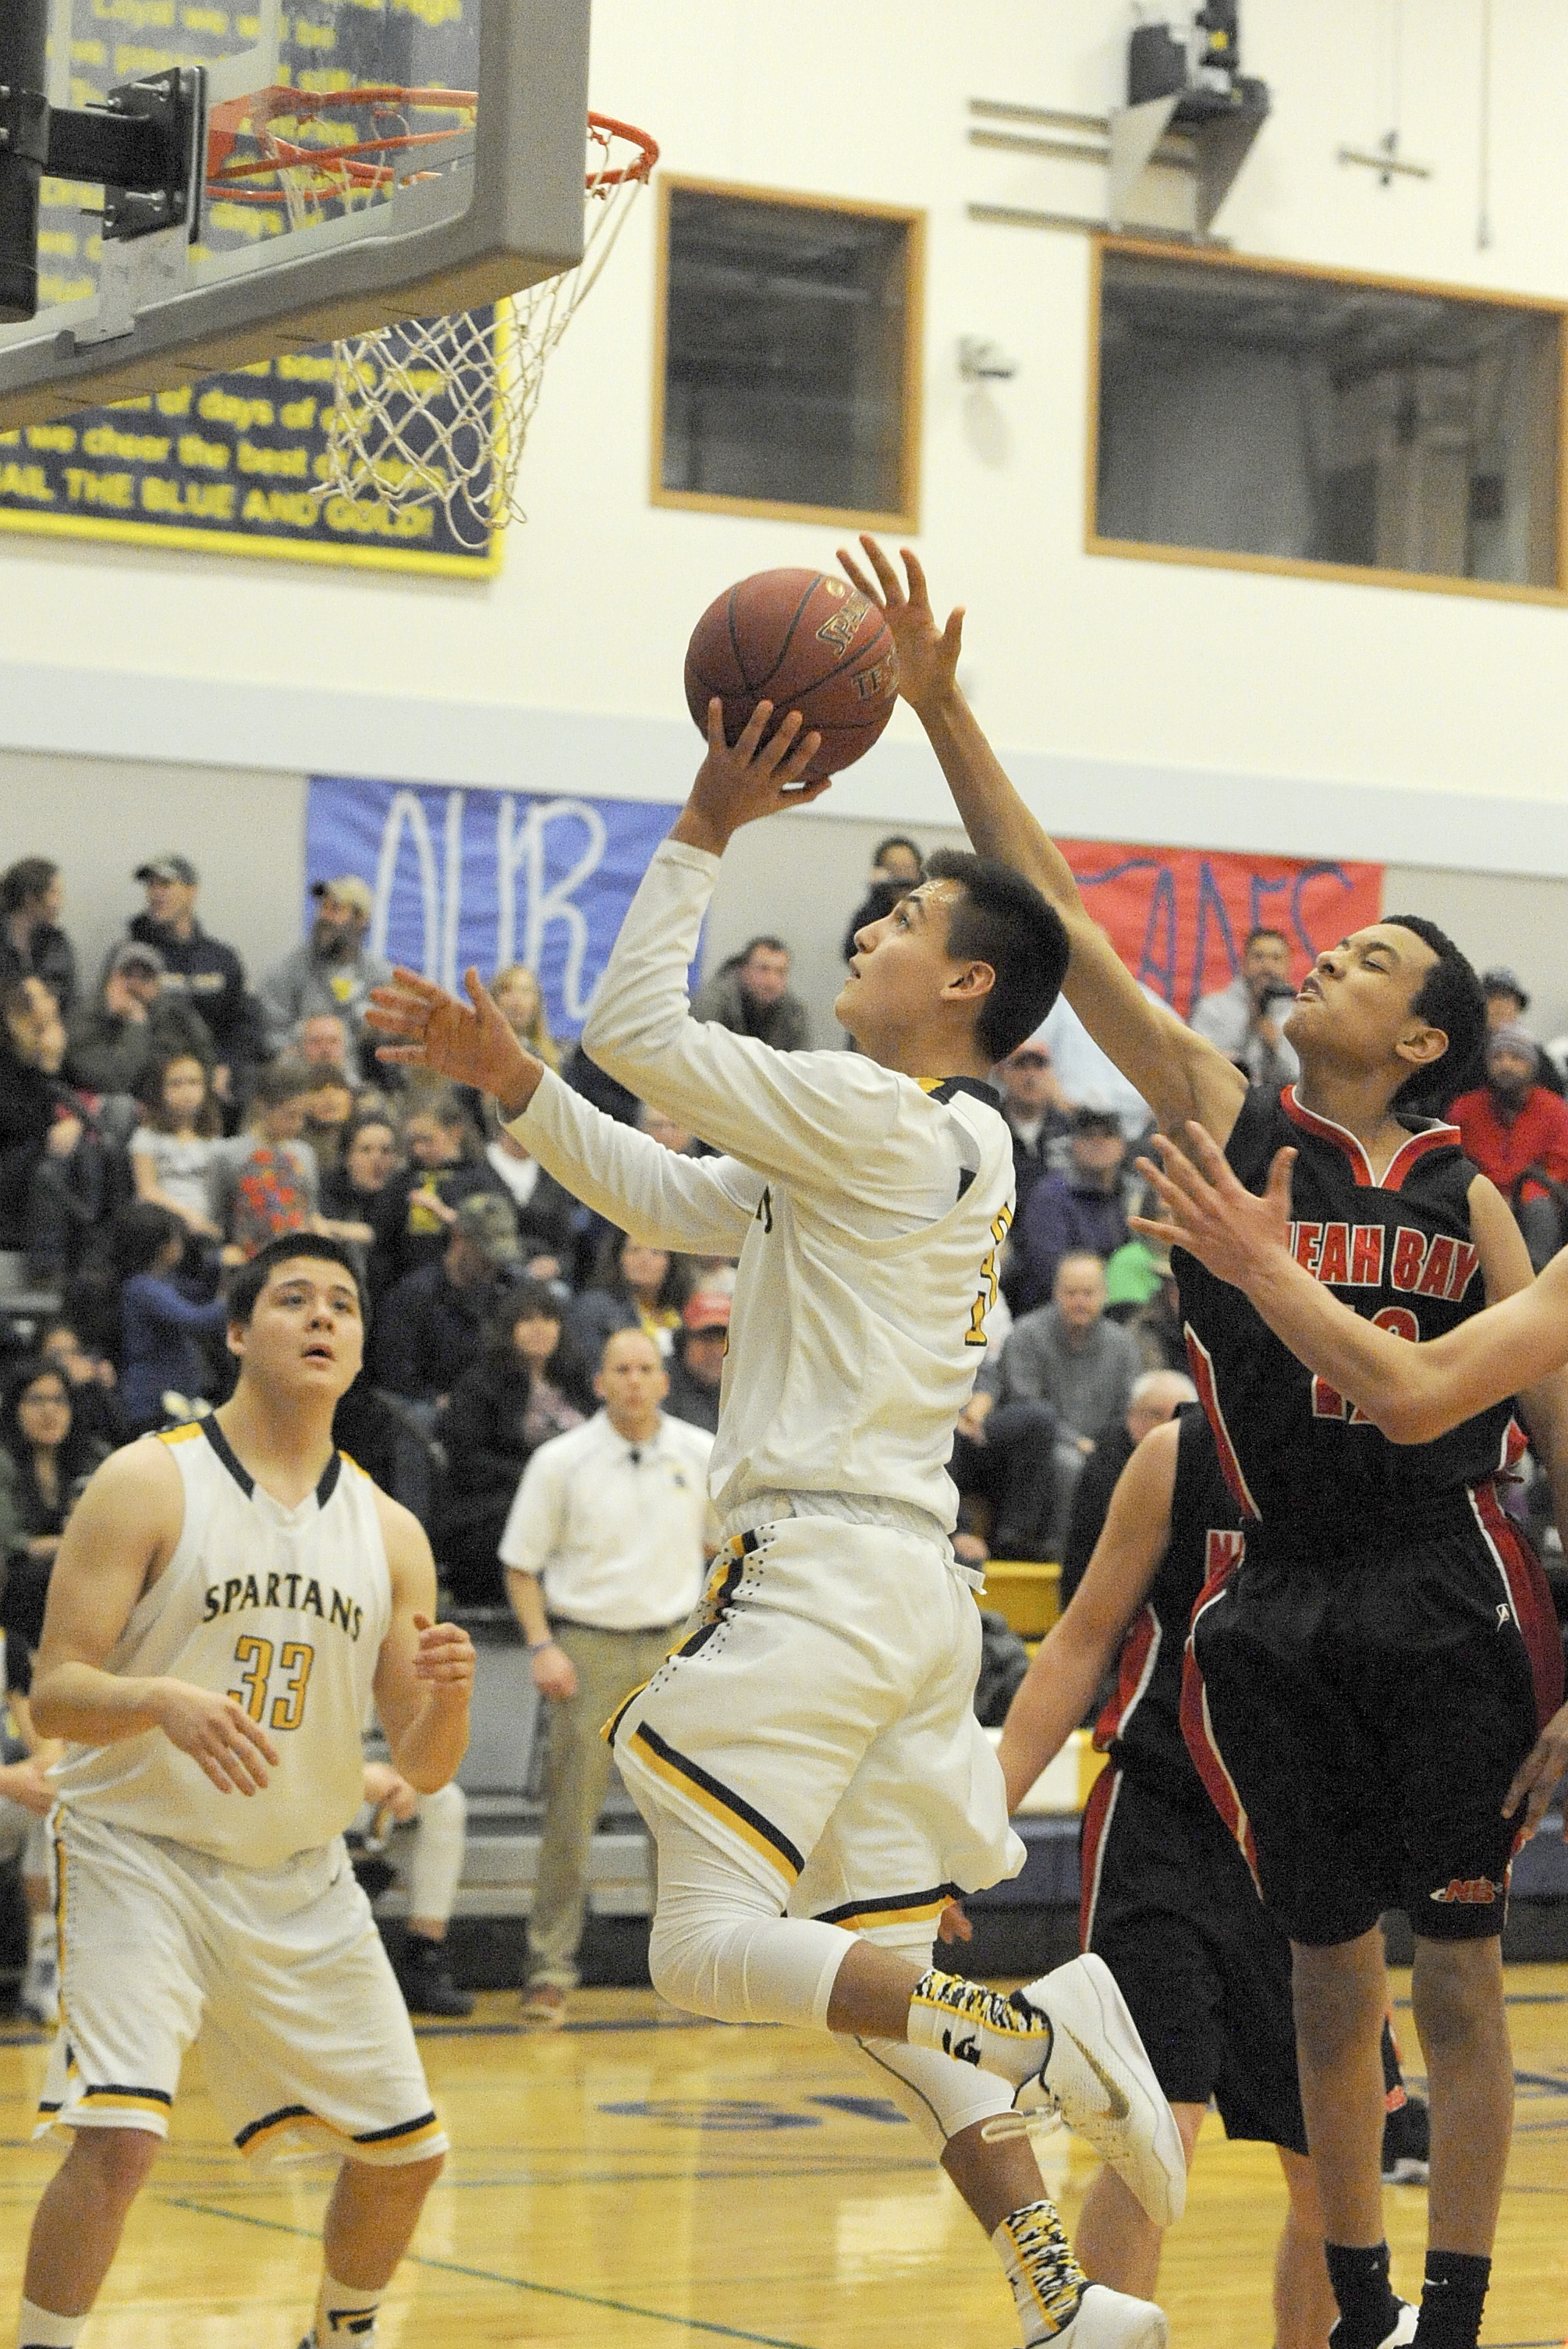 Lonnie Archibald/for Peninsula Daily News                                Forks’ Keishaun Ramsey shoots around the defense of Neah Bay’s Sean Bitegeko while the Spartans’ Austin Flores looks on. Forks won 77-50.